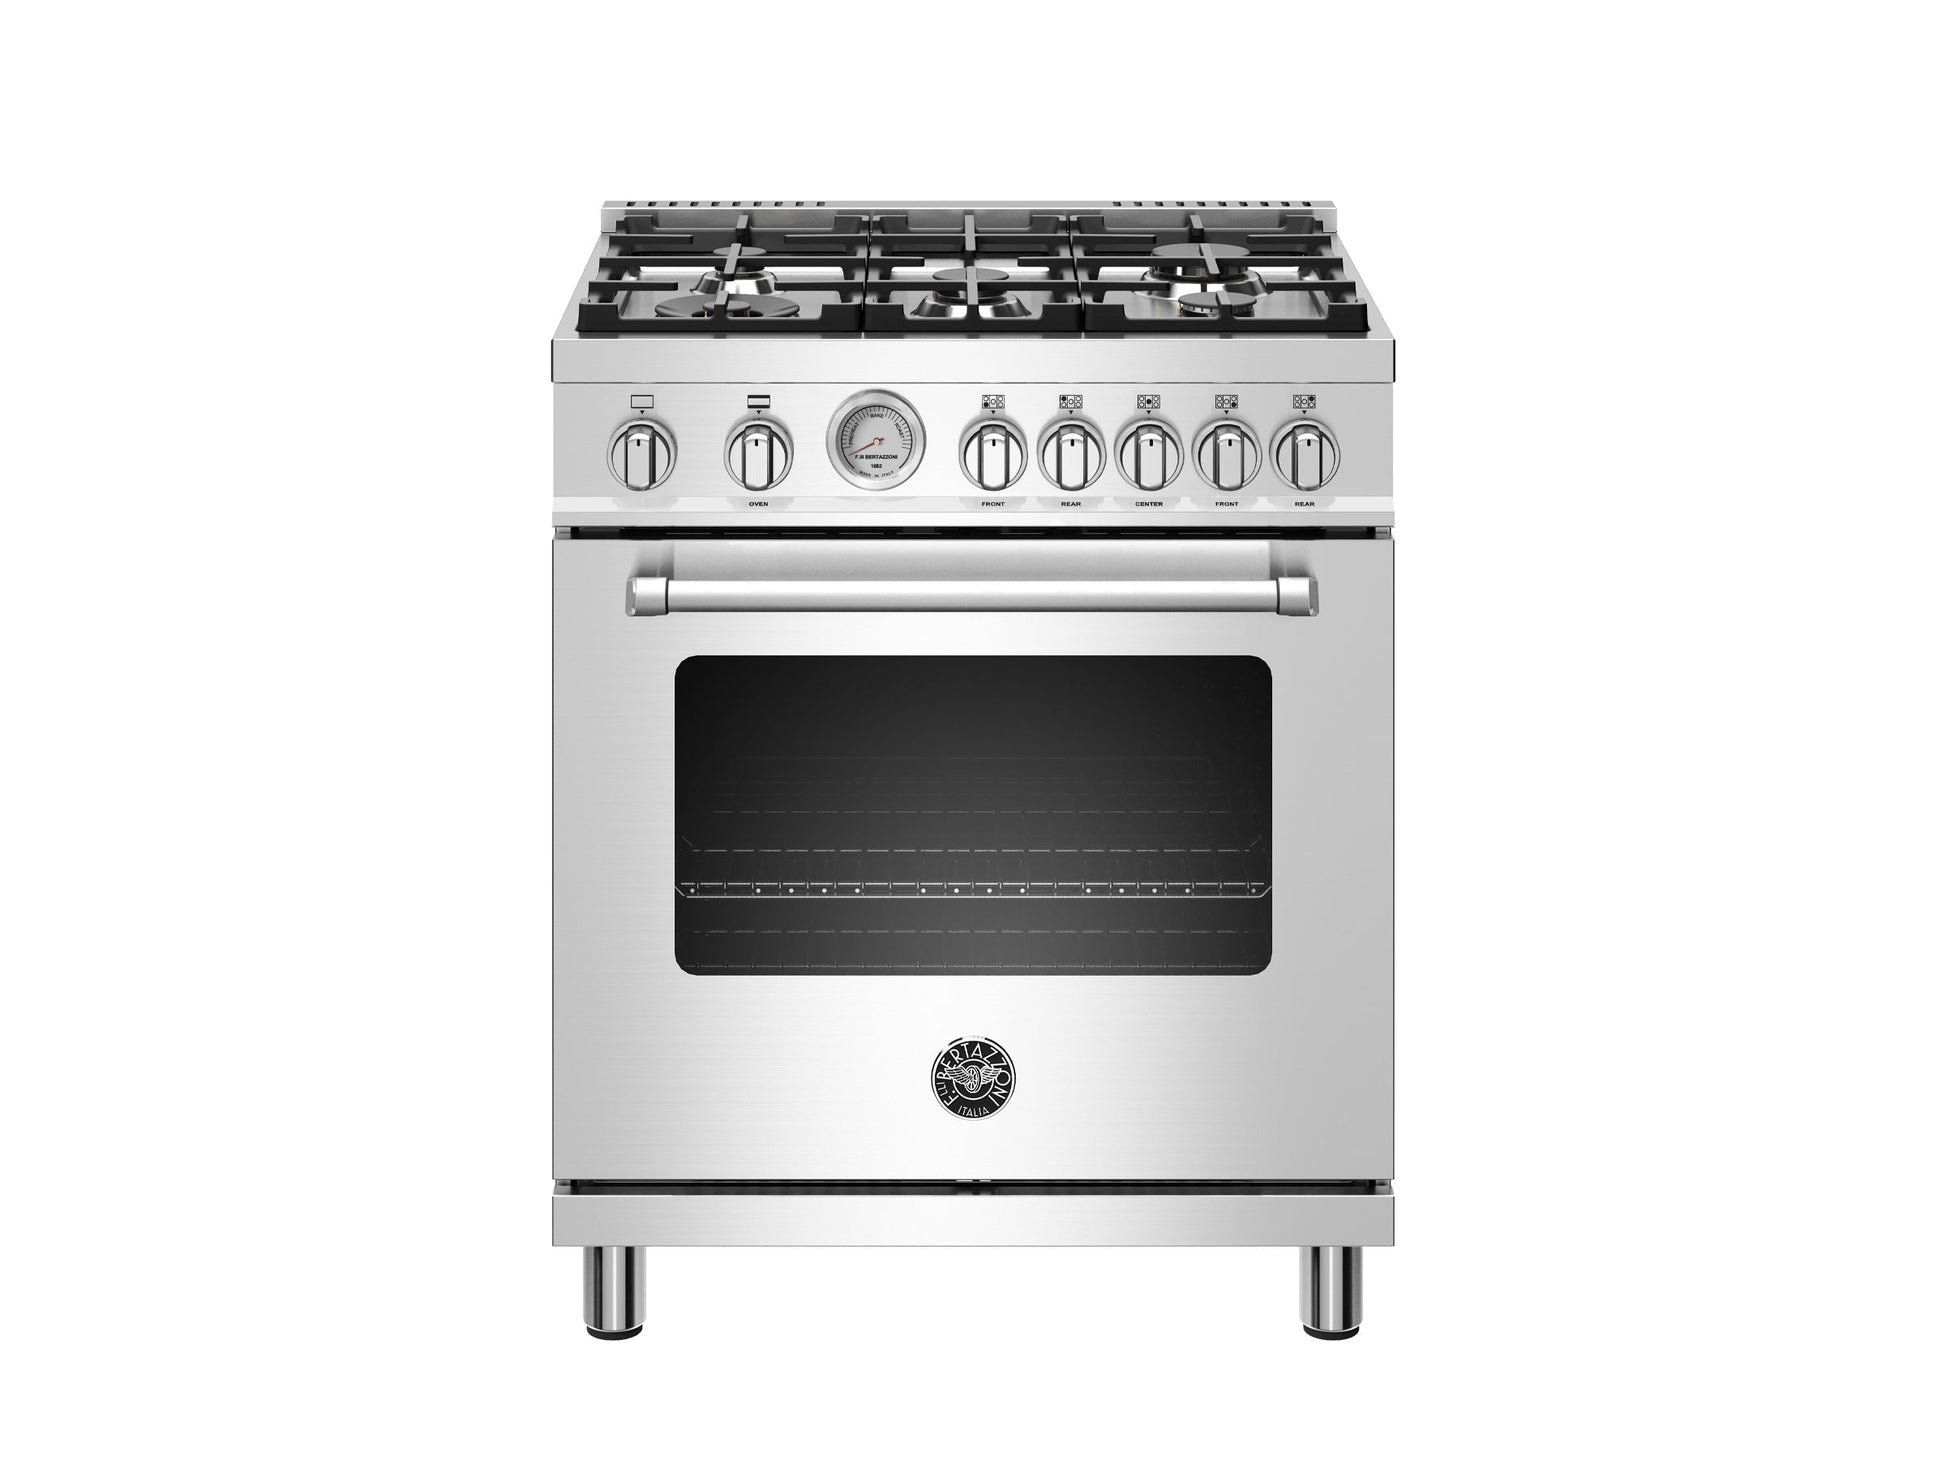 Danby 20 Wide Gas Range in Stainless Steel - DR202BSSGLP